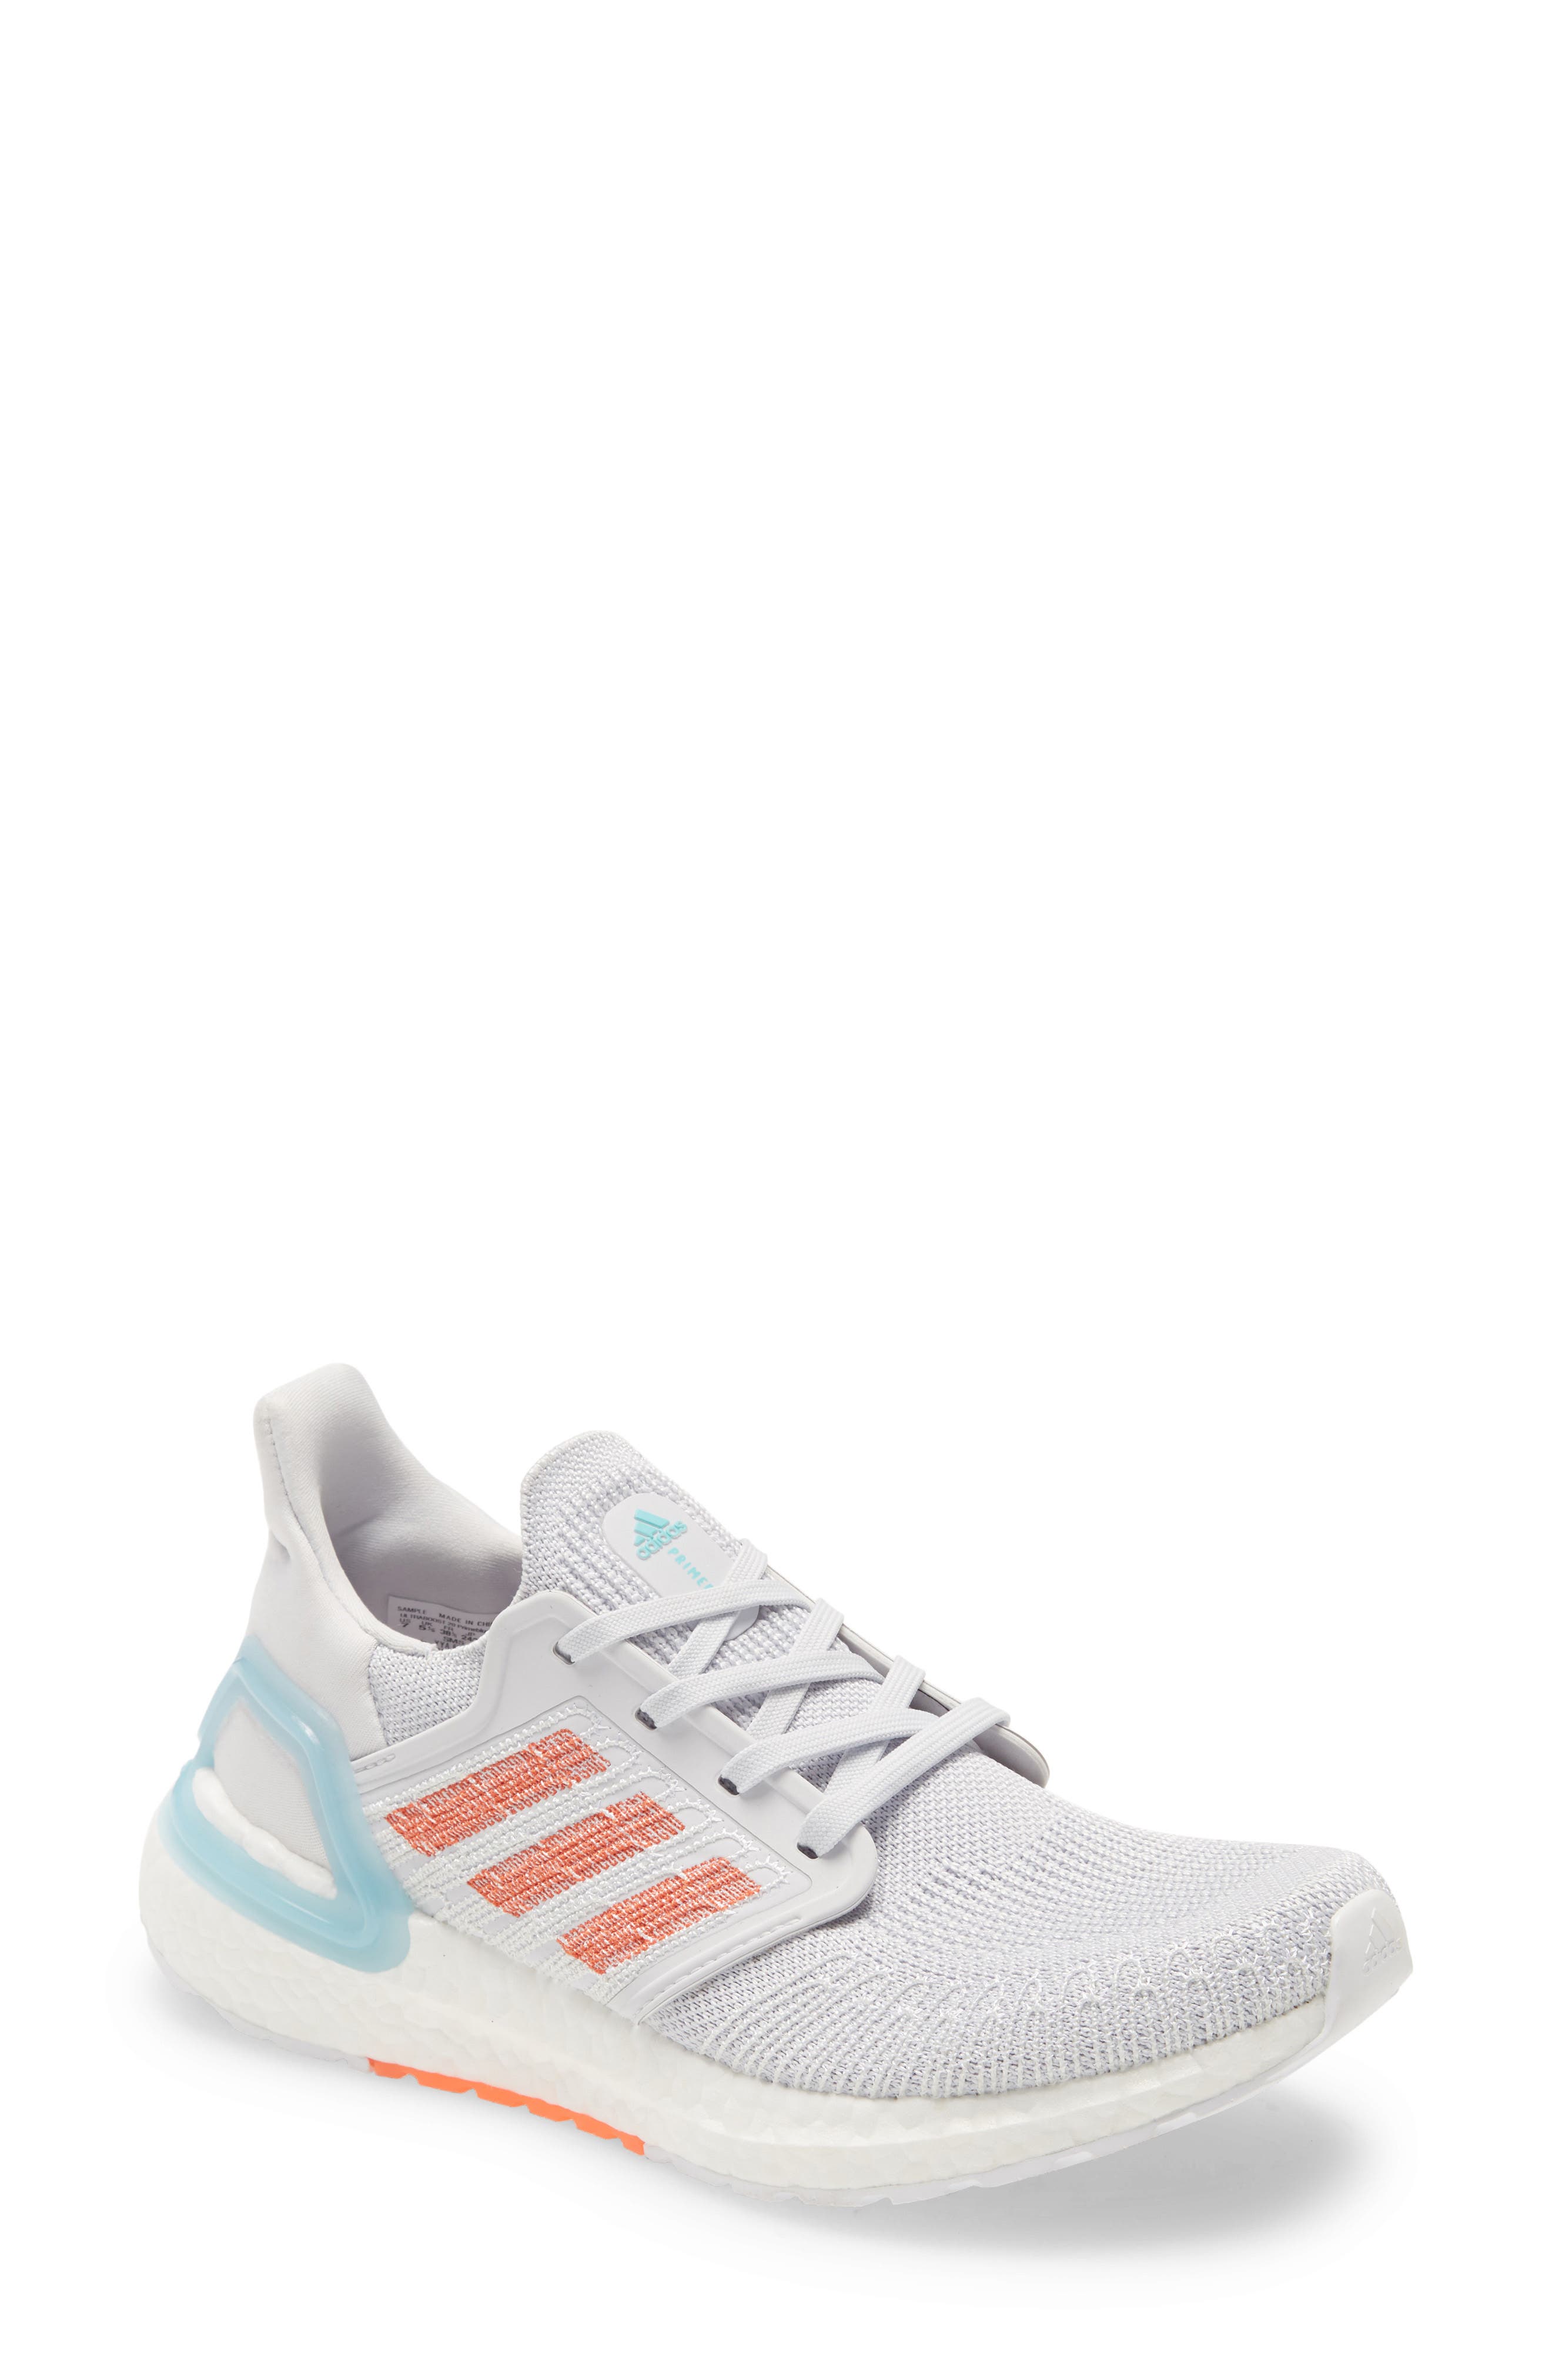 womens adidas clearance shoes